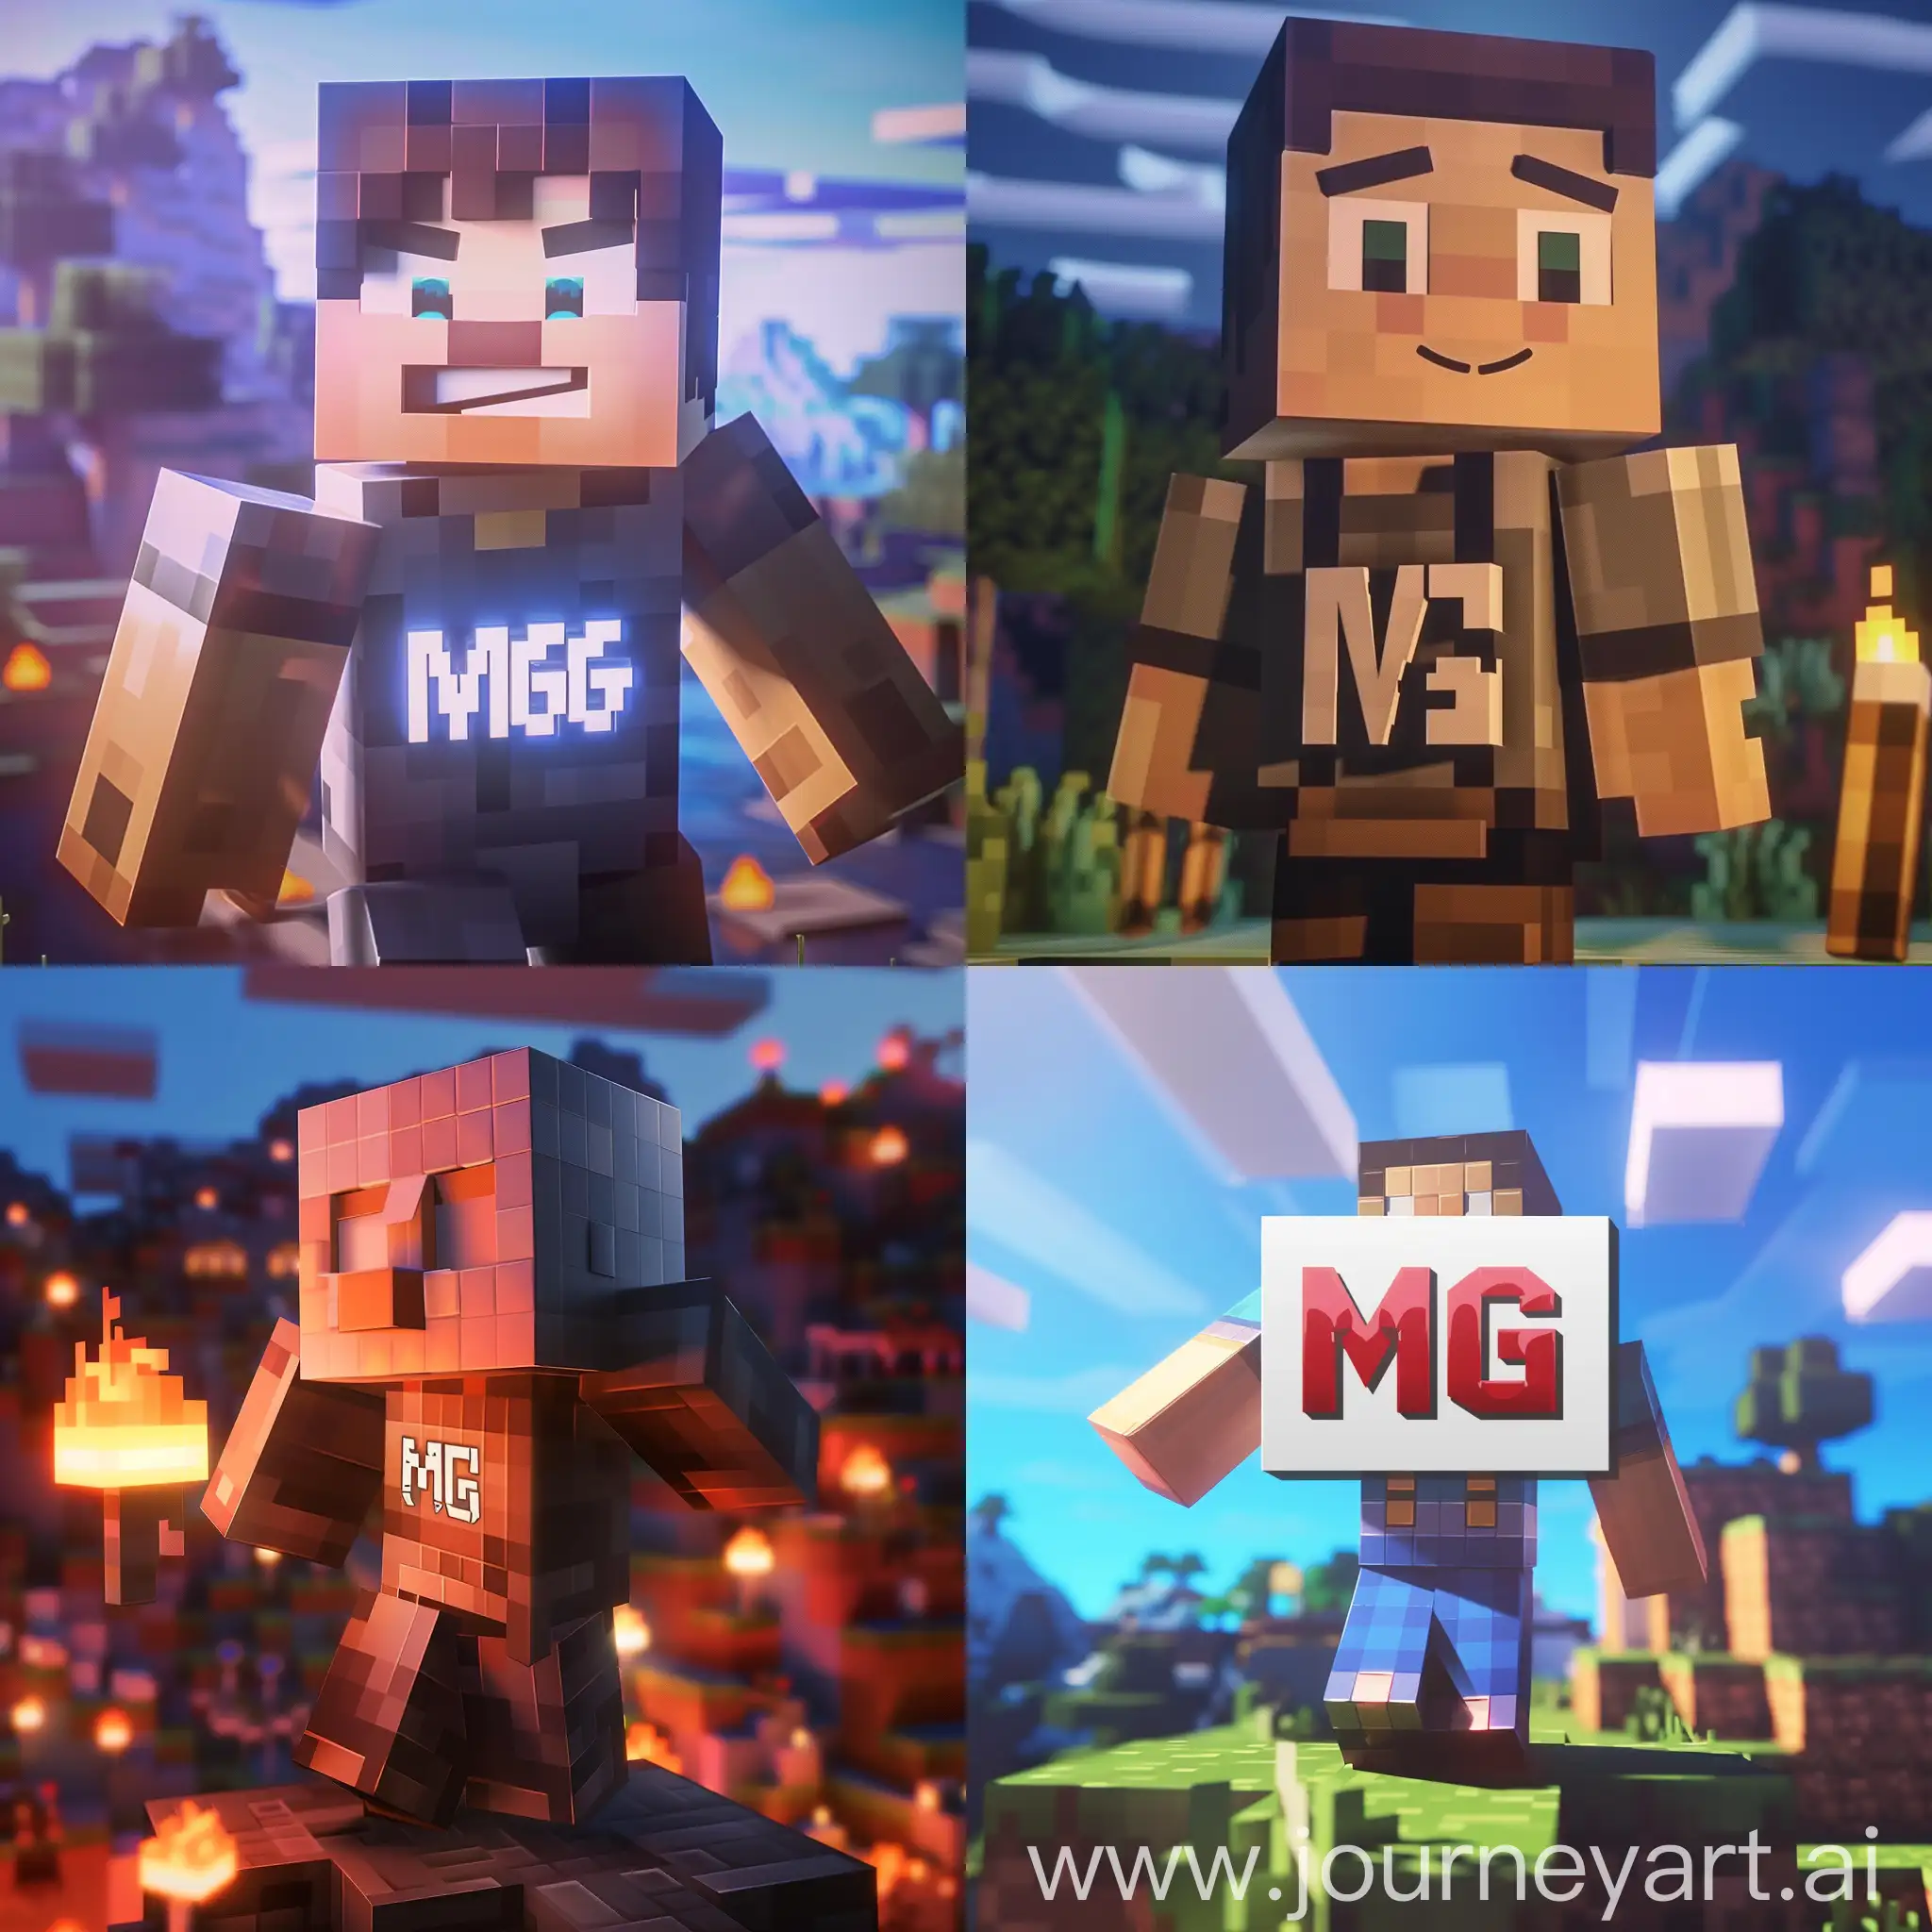 Make me an avatar with MG text on the background of minecraft